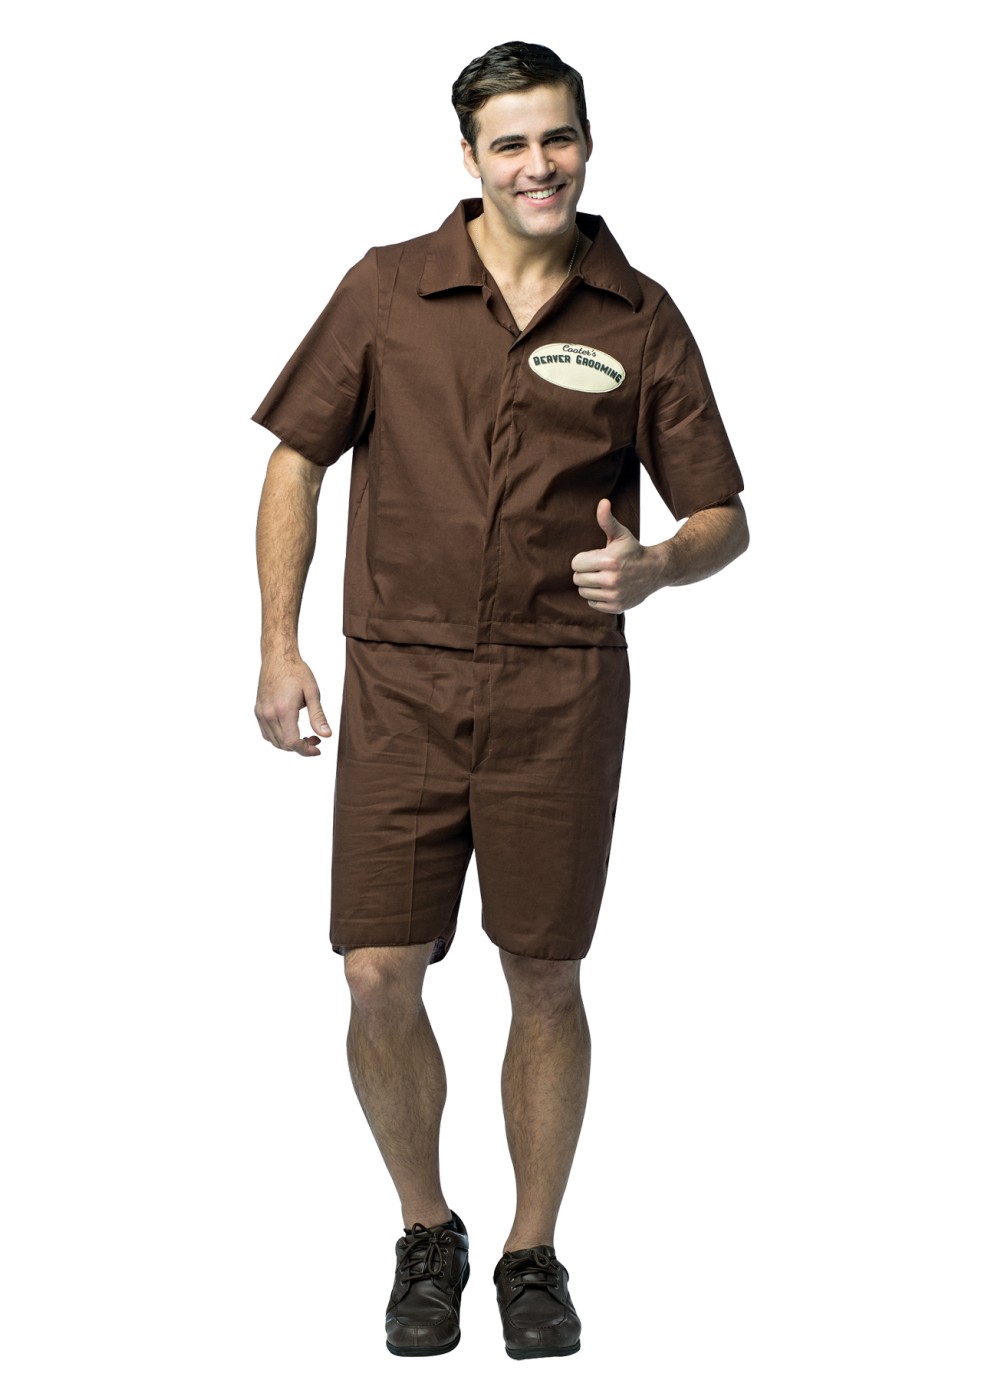 Cooter Beaver Grooming Costume